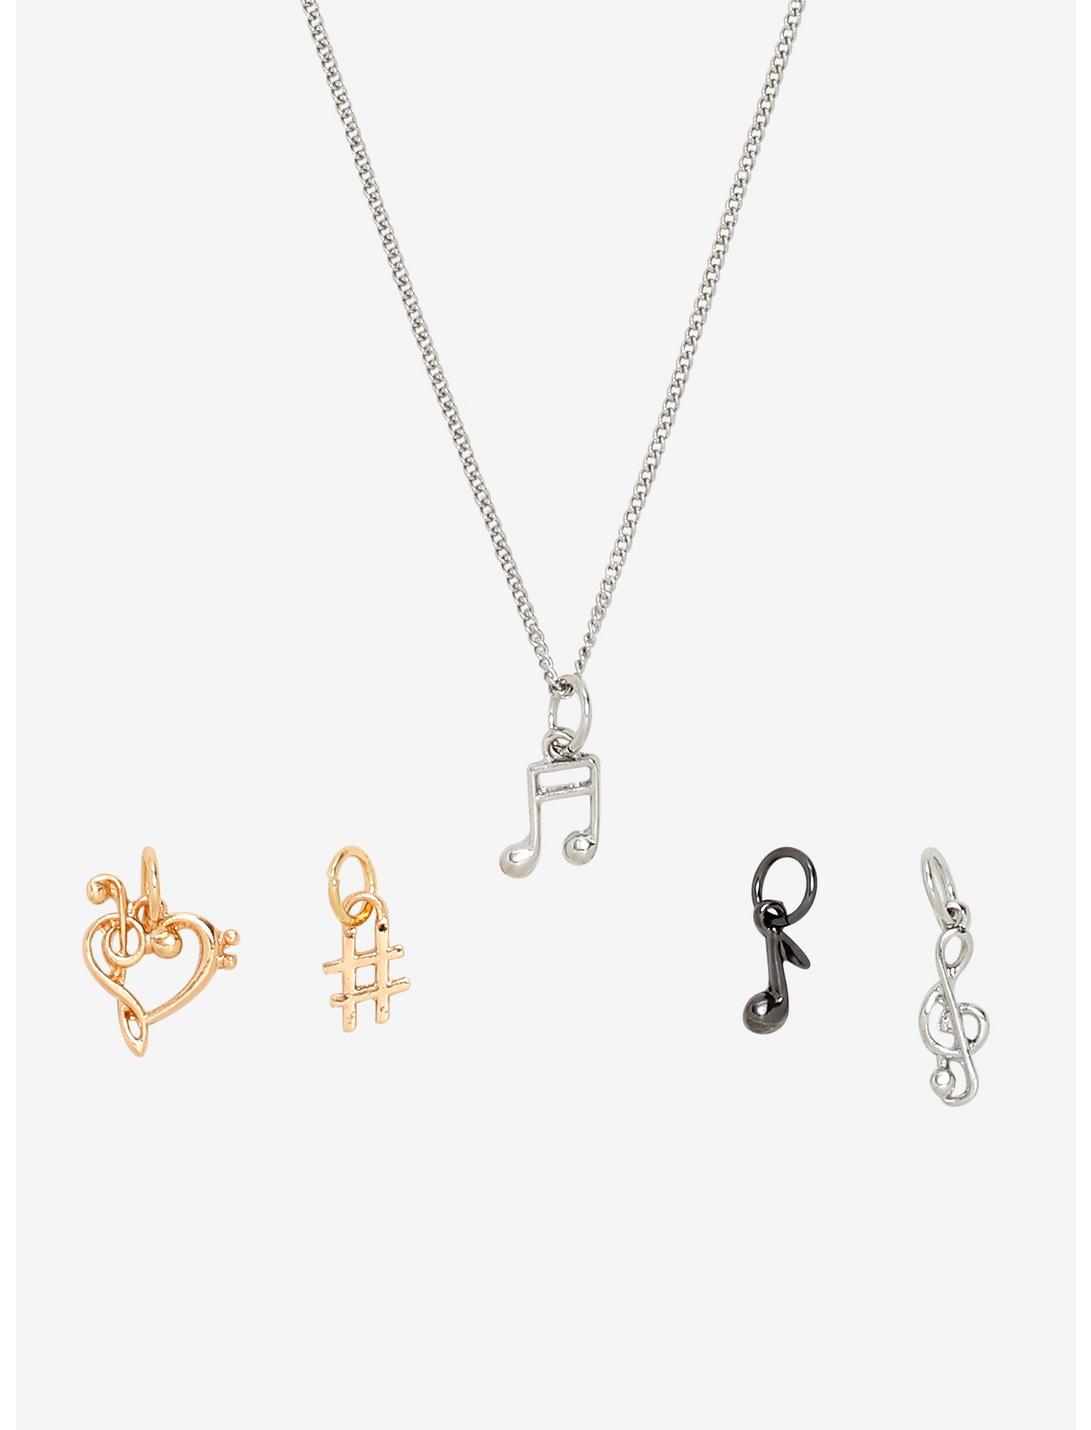 Music Notes Multi Charm Necklace, , hi-res